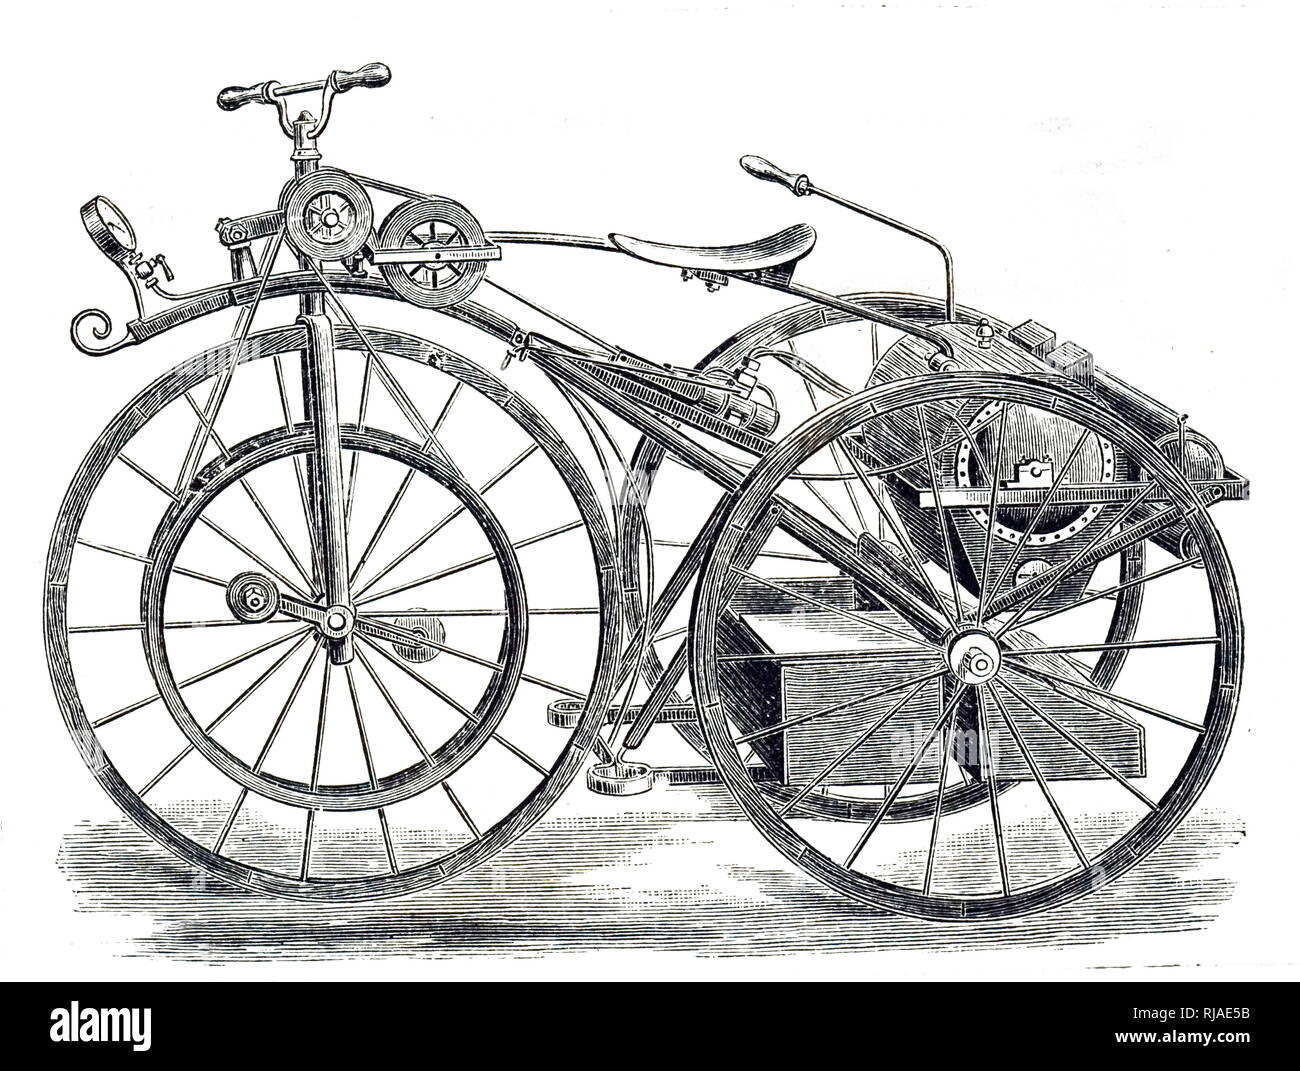 19th-century illustration showing Michaux-Perreaux's, steam velocipede; a steam-powered velocipede made in France sometime from 1867 to 1871, when a small Louis-Guillaume Perreaux commercial steam engine was attached to a Pierre Michaux manufactured iron framed pedal bicycle Stock Photo